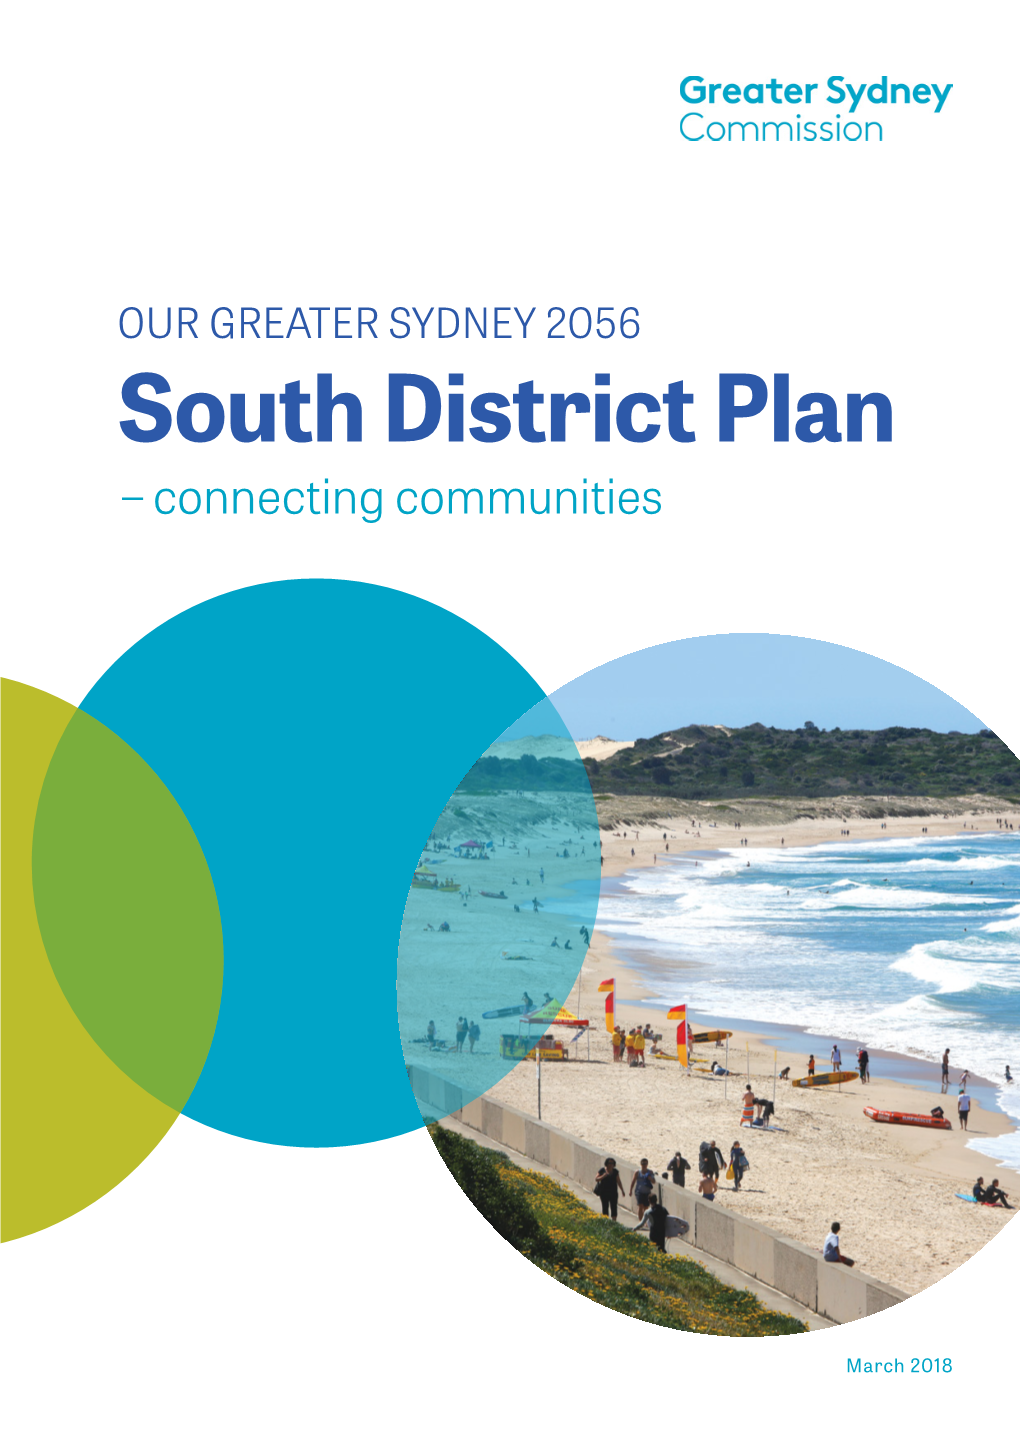 OUR GREATER SYDNEY 2056 South District Plan – Connecting Communities